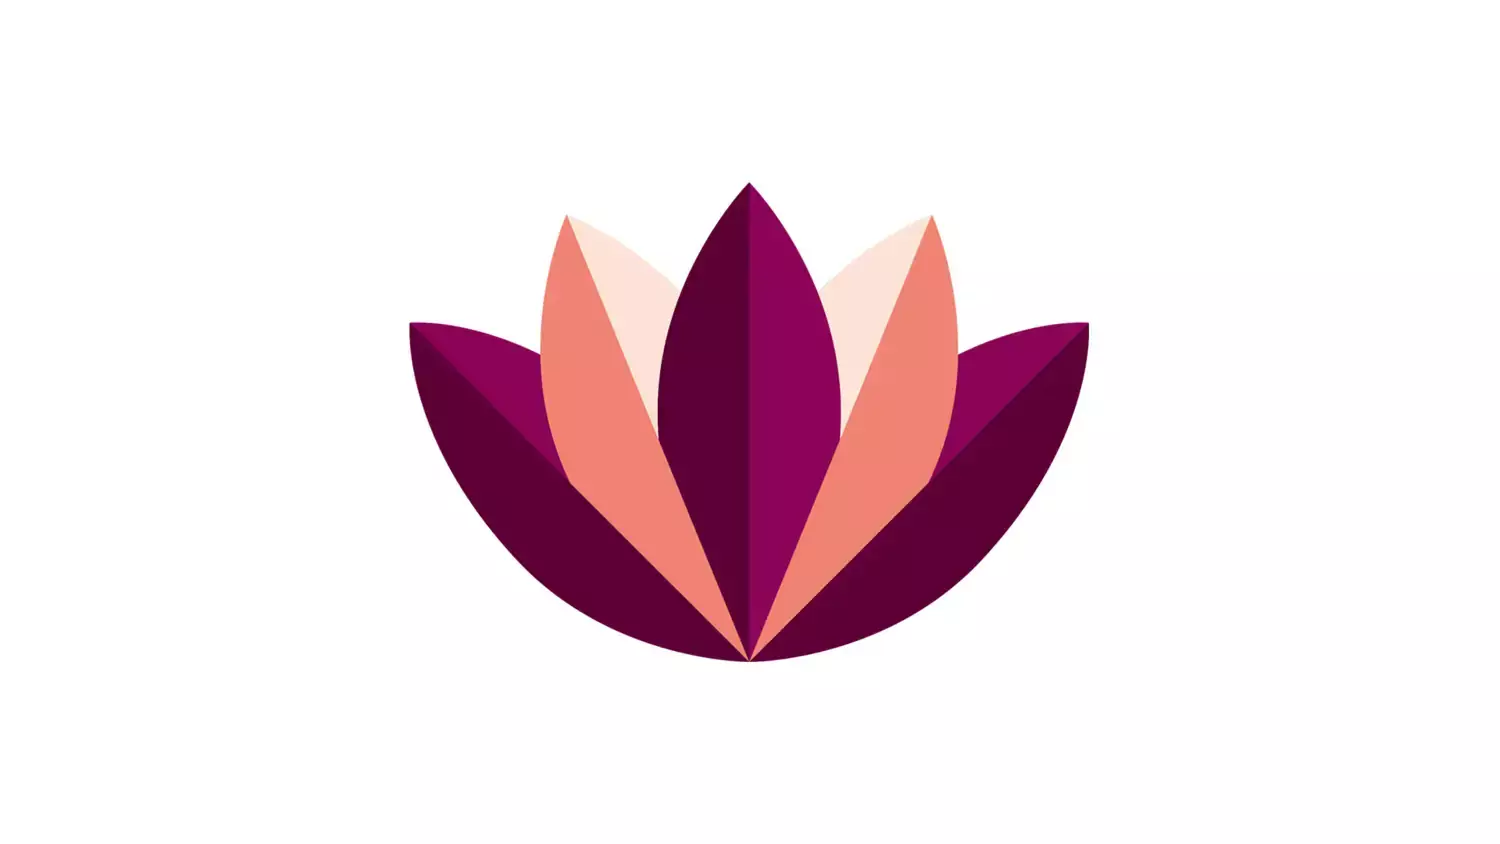 A graphic shape resembling a water lily with pointed petals in KI's profile colour plum purple and lighter shades.